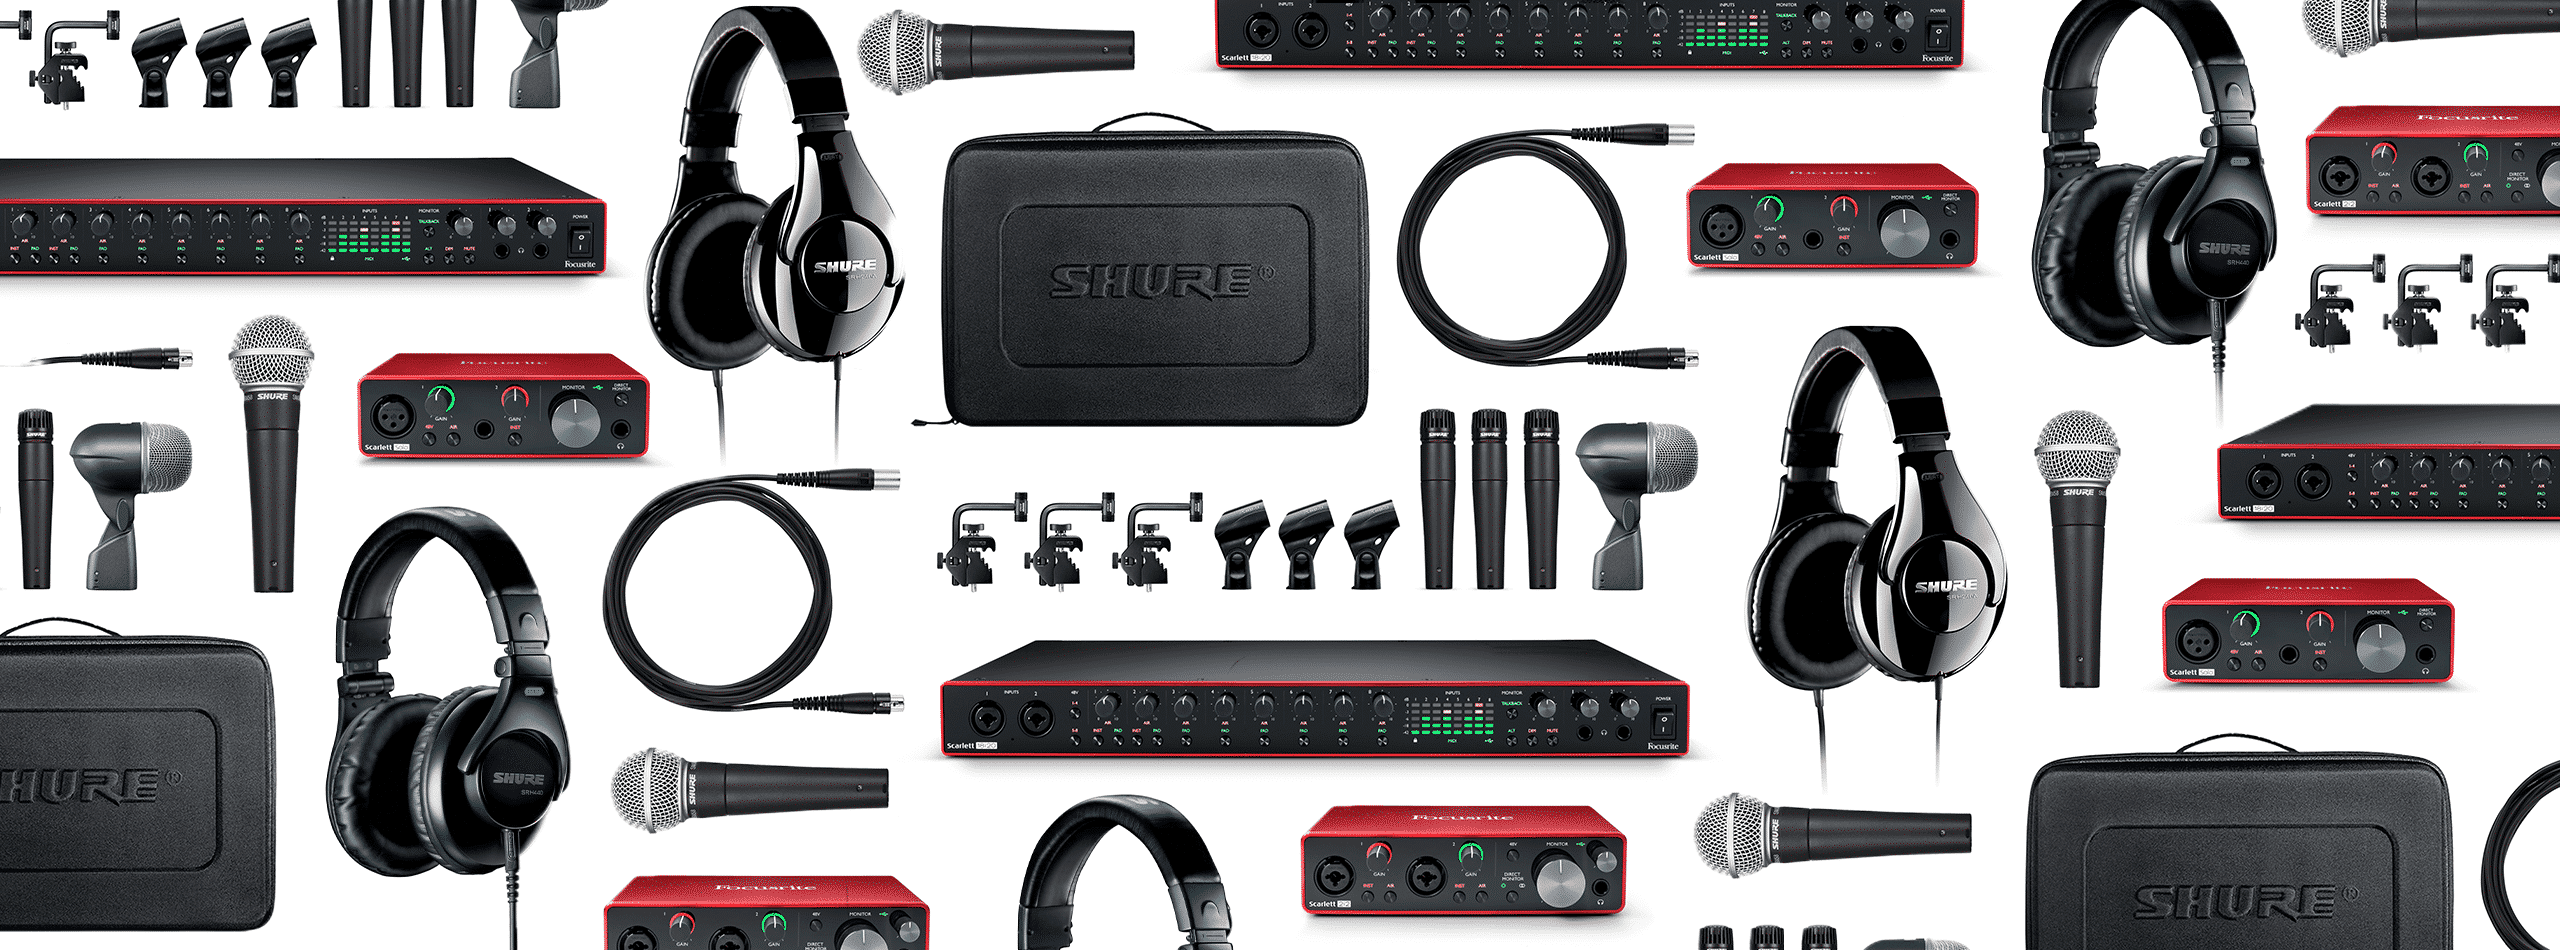 Focusrite & Shure Team Up For Package Deals for Singer/Songwriters, Podcasters